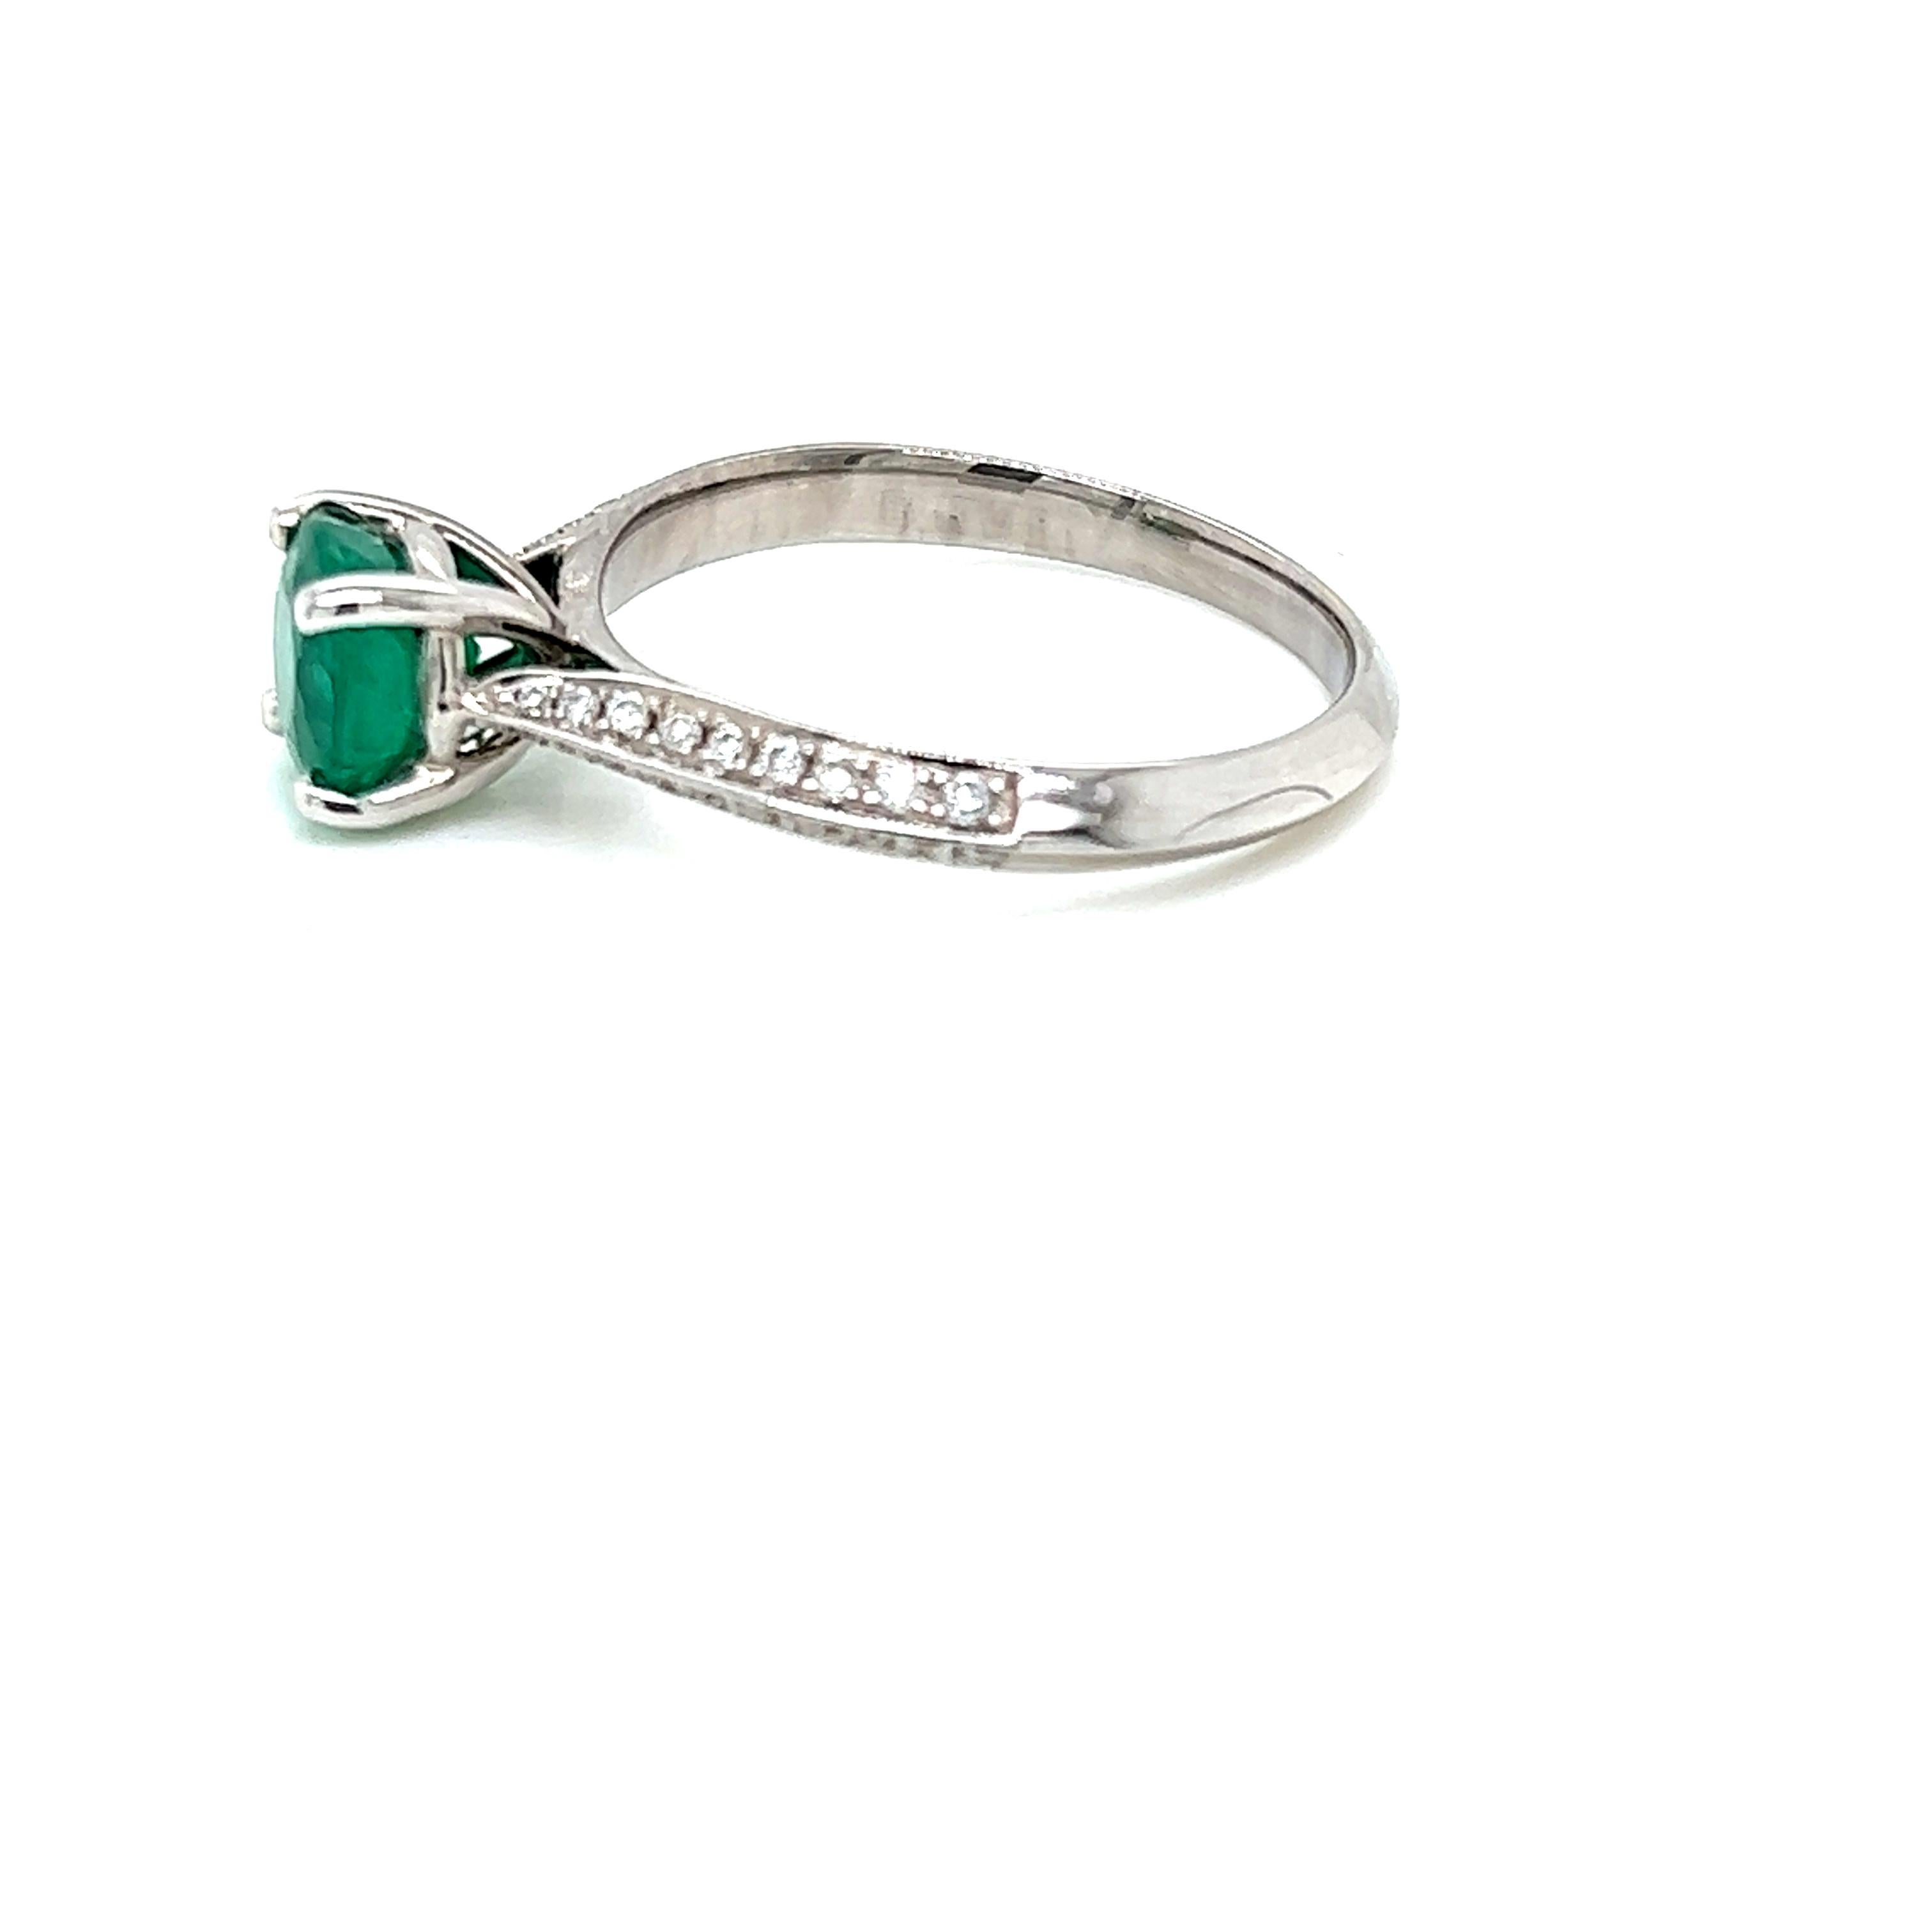 Contemporary 1.1 Carat Round Brilliant Emerald and Diamond Ring in 18 Karat White Gold For Sale